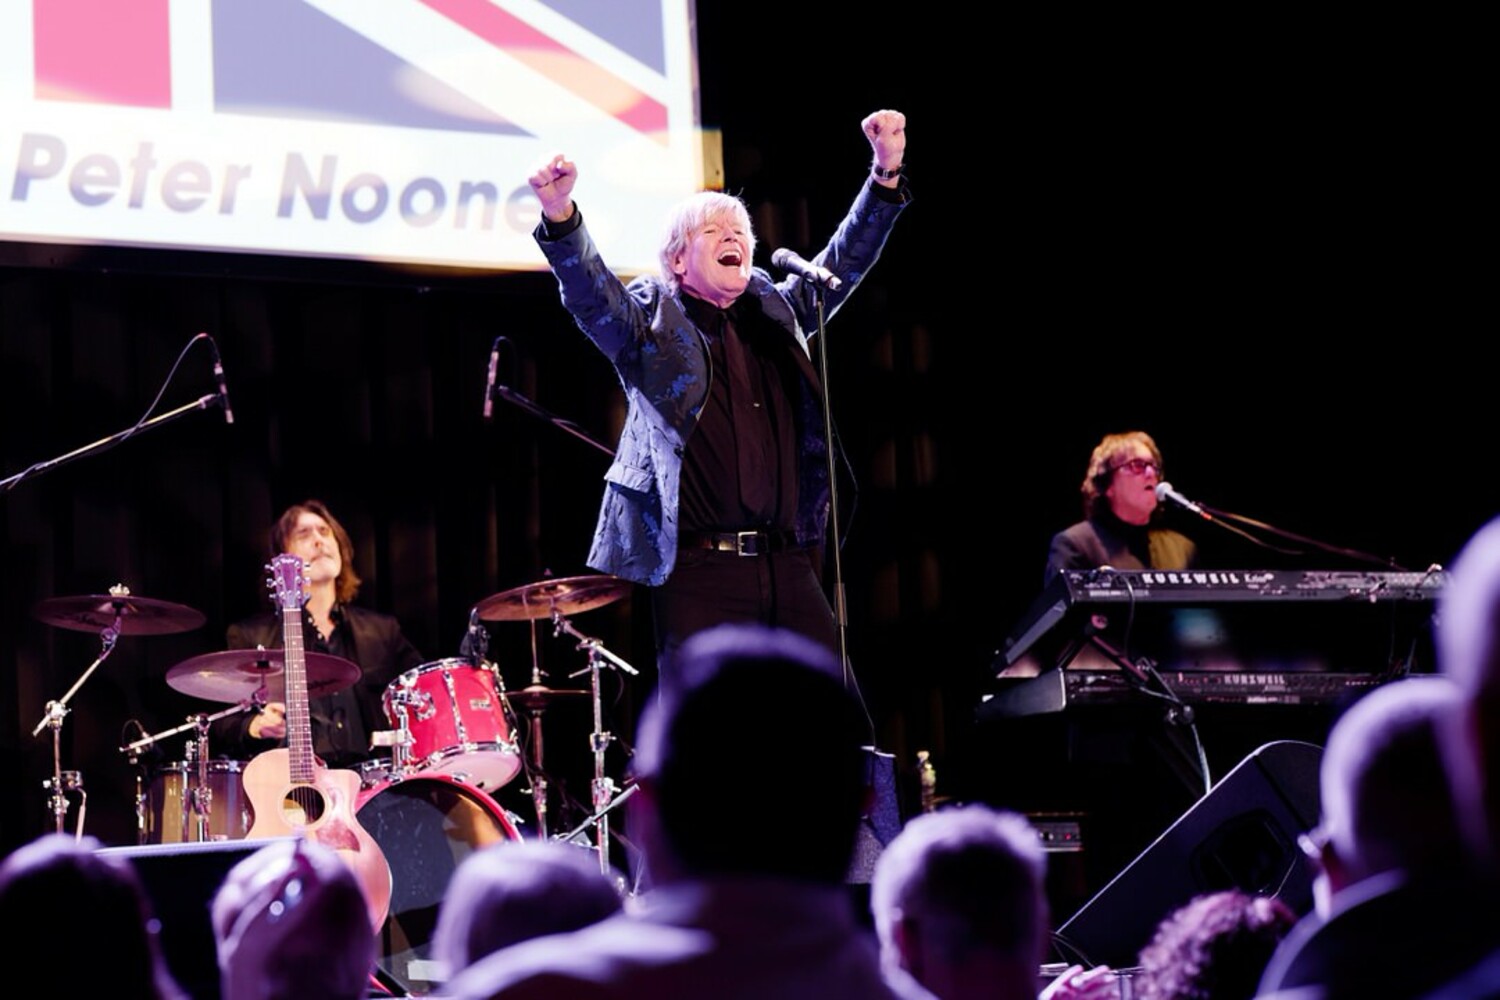 Dave Ferrara, Peter Noone and Rich Spina of the Herman's Hermits perform at The Suffolk on May 10. COURTESY THE SUFFOLK